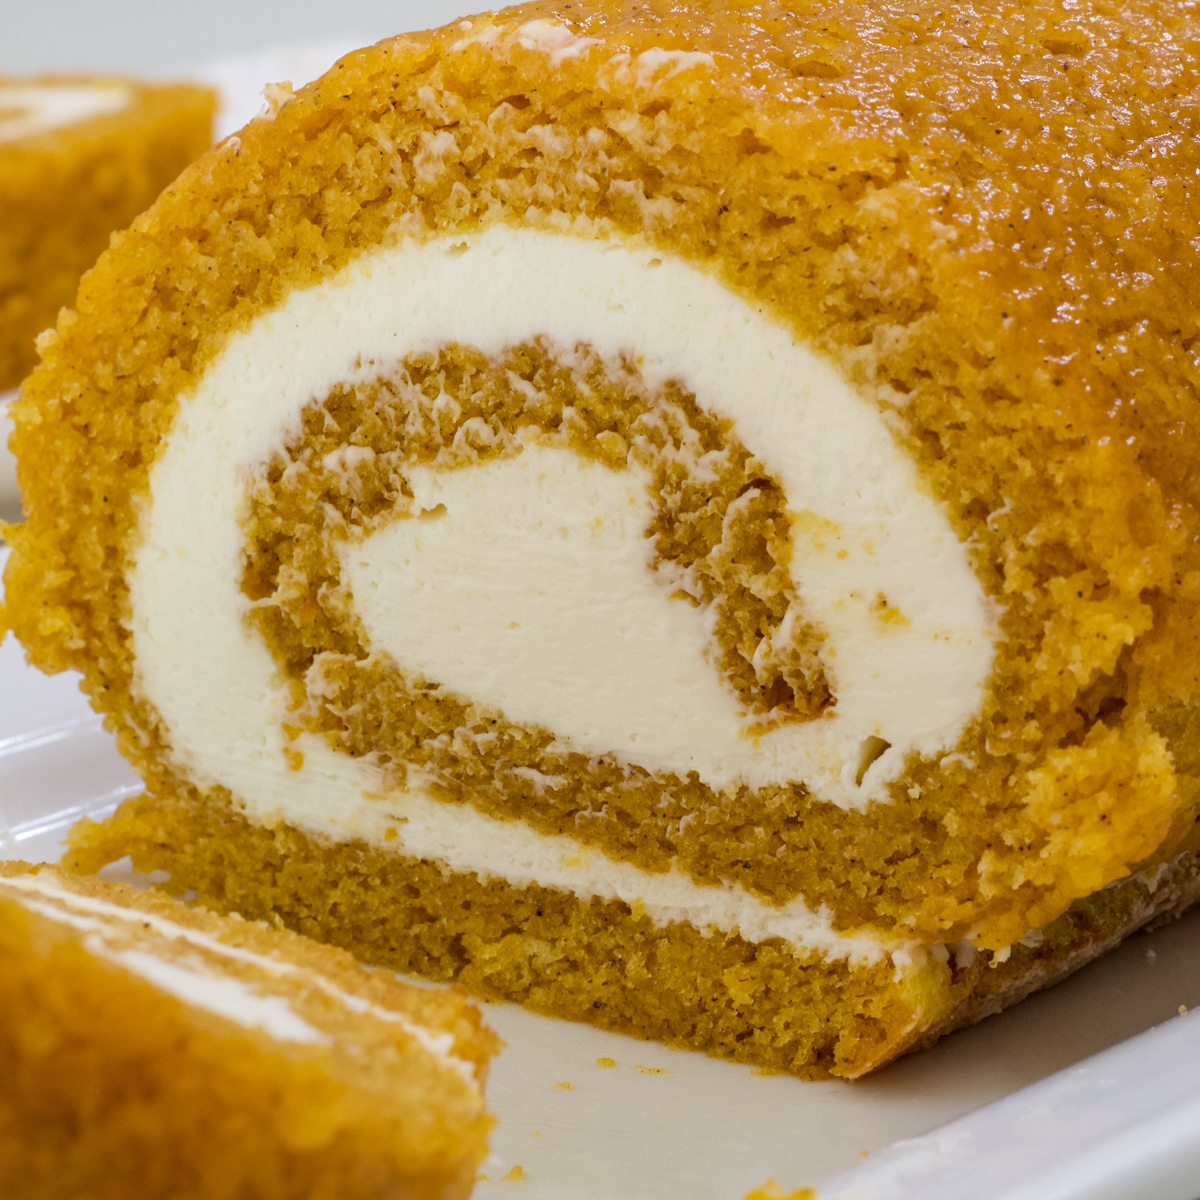 https://www.mindyscookingobsession.com/wp-content/uploads/2023/09/Libbys-Pumpkin-Roll-Recipe-with-Cream-Cheese-Filling-1200.1.jpg